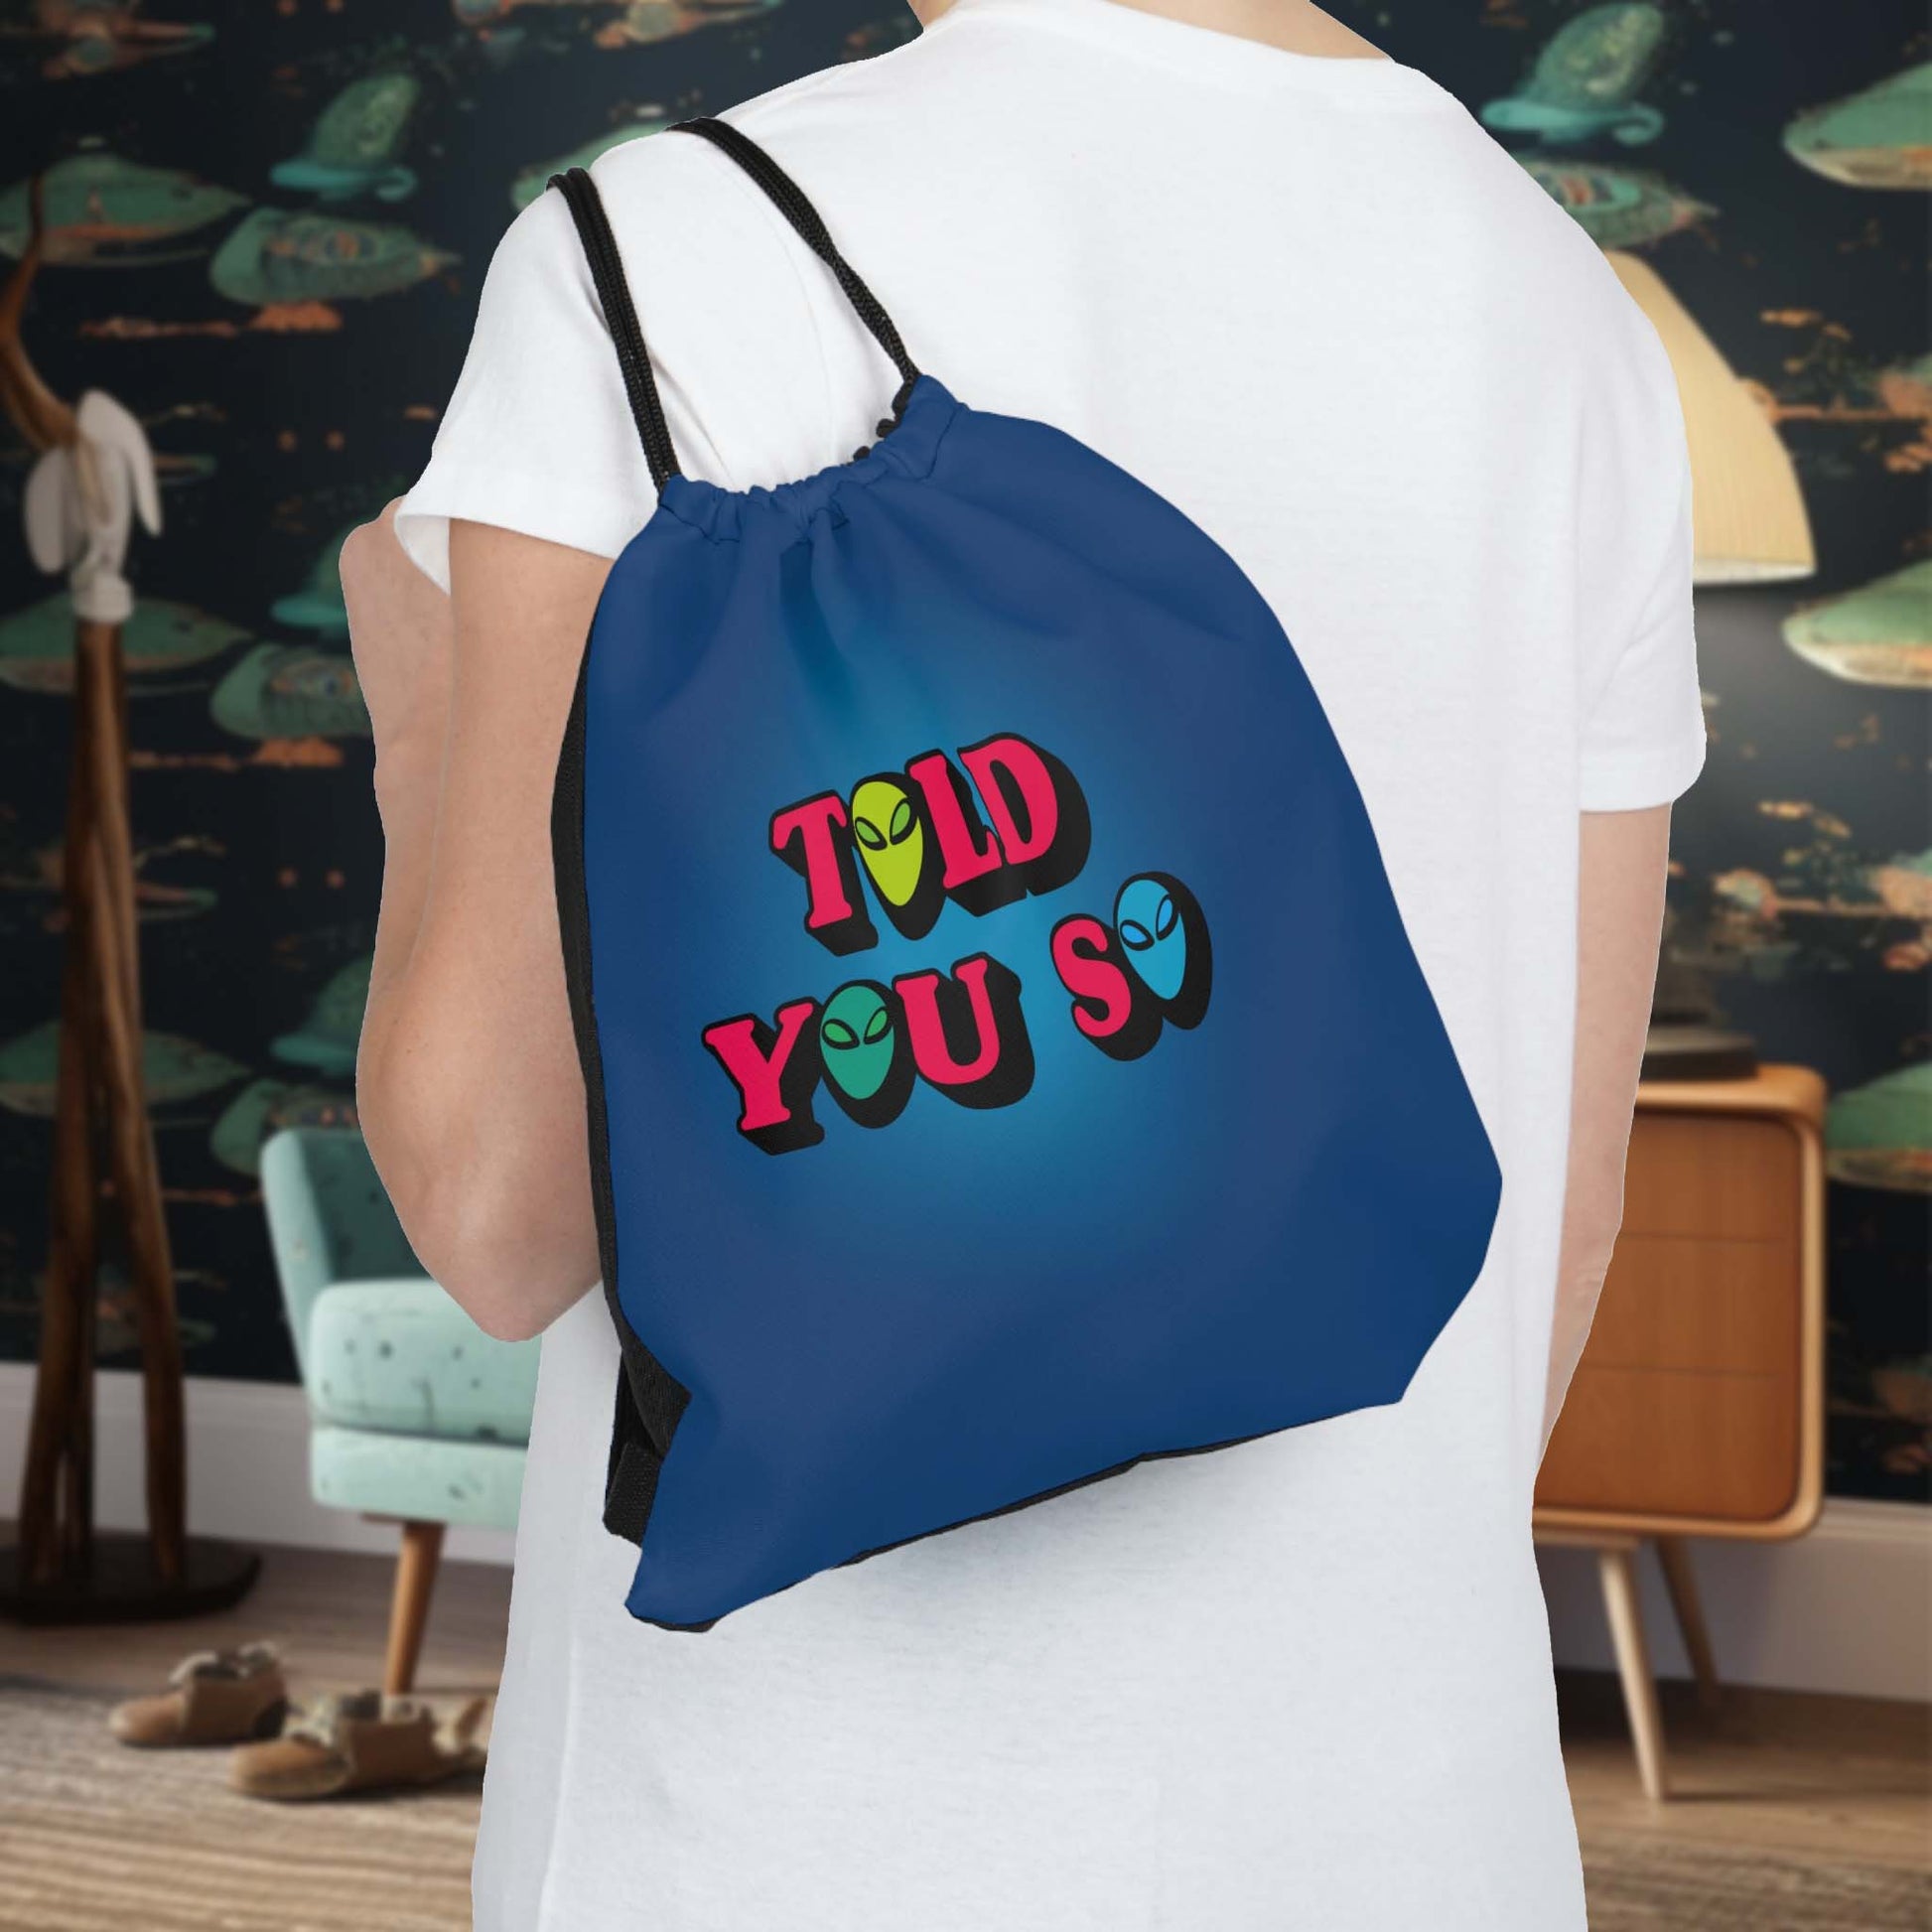 Outdoor Drawstring Bag with funny meme 'TOLD YOU SO' – PROUD TO BE ME  fashion